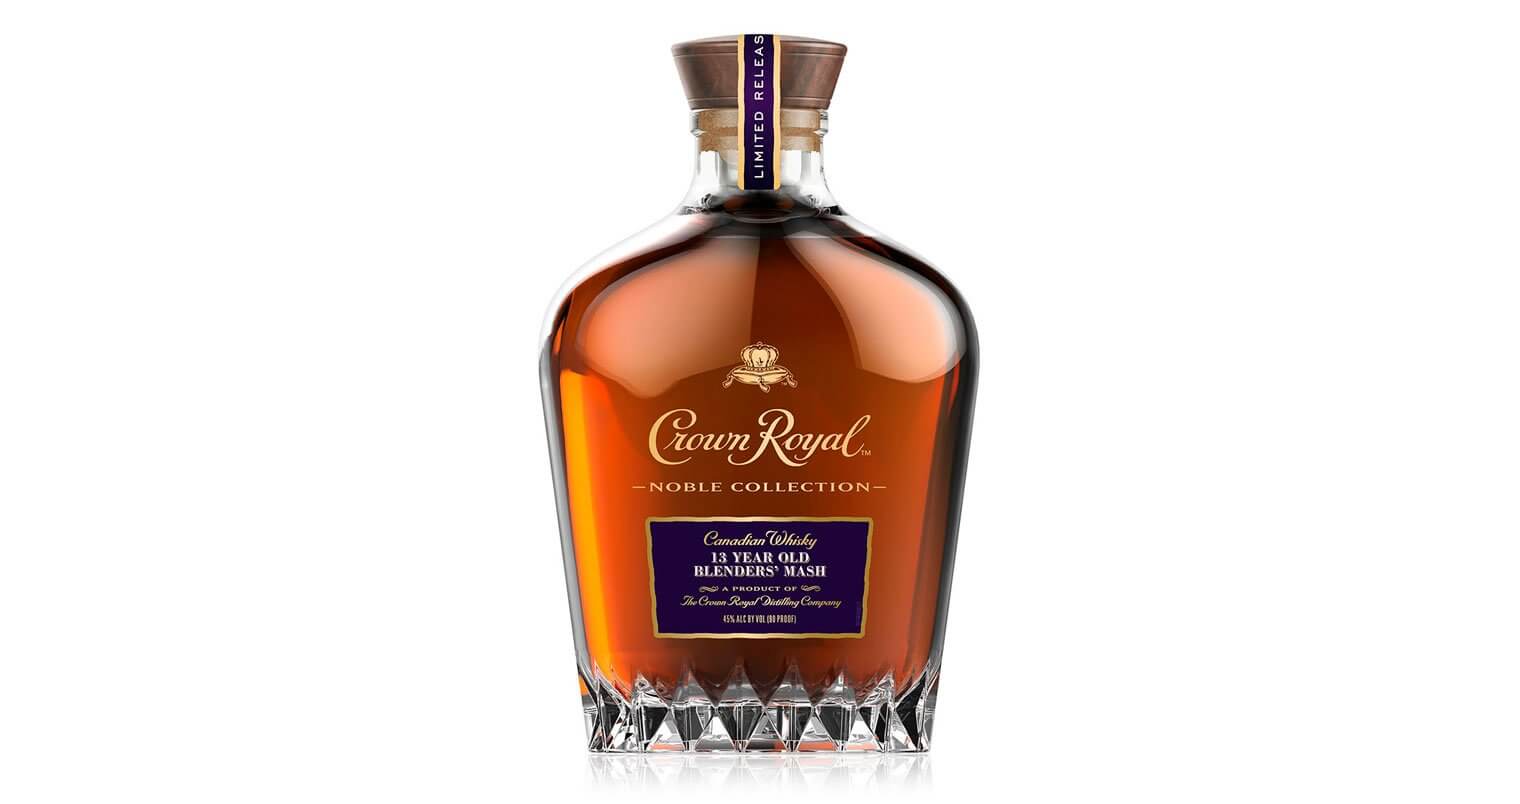 Crown Royal 13-Year-Old Blenders’ Mash, bottle on white, featured image